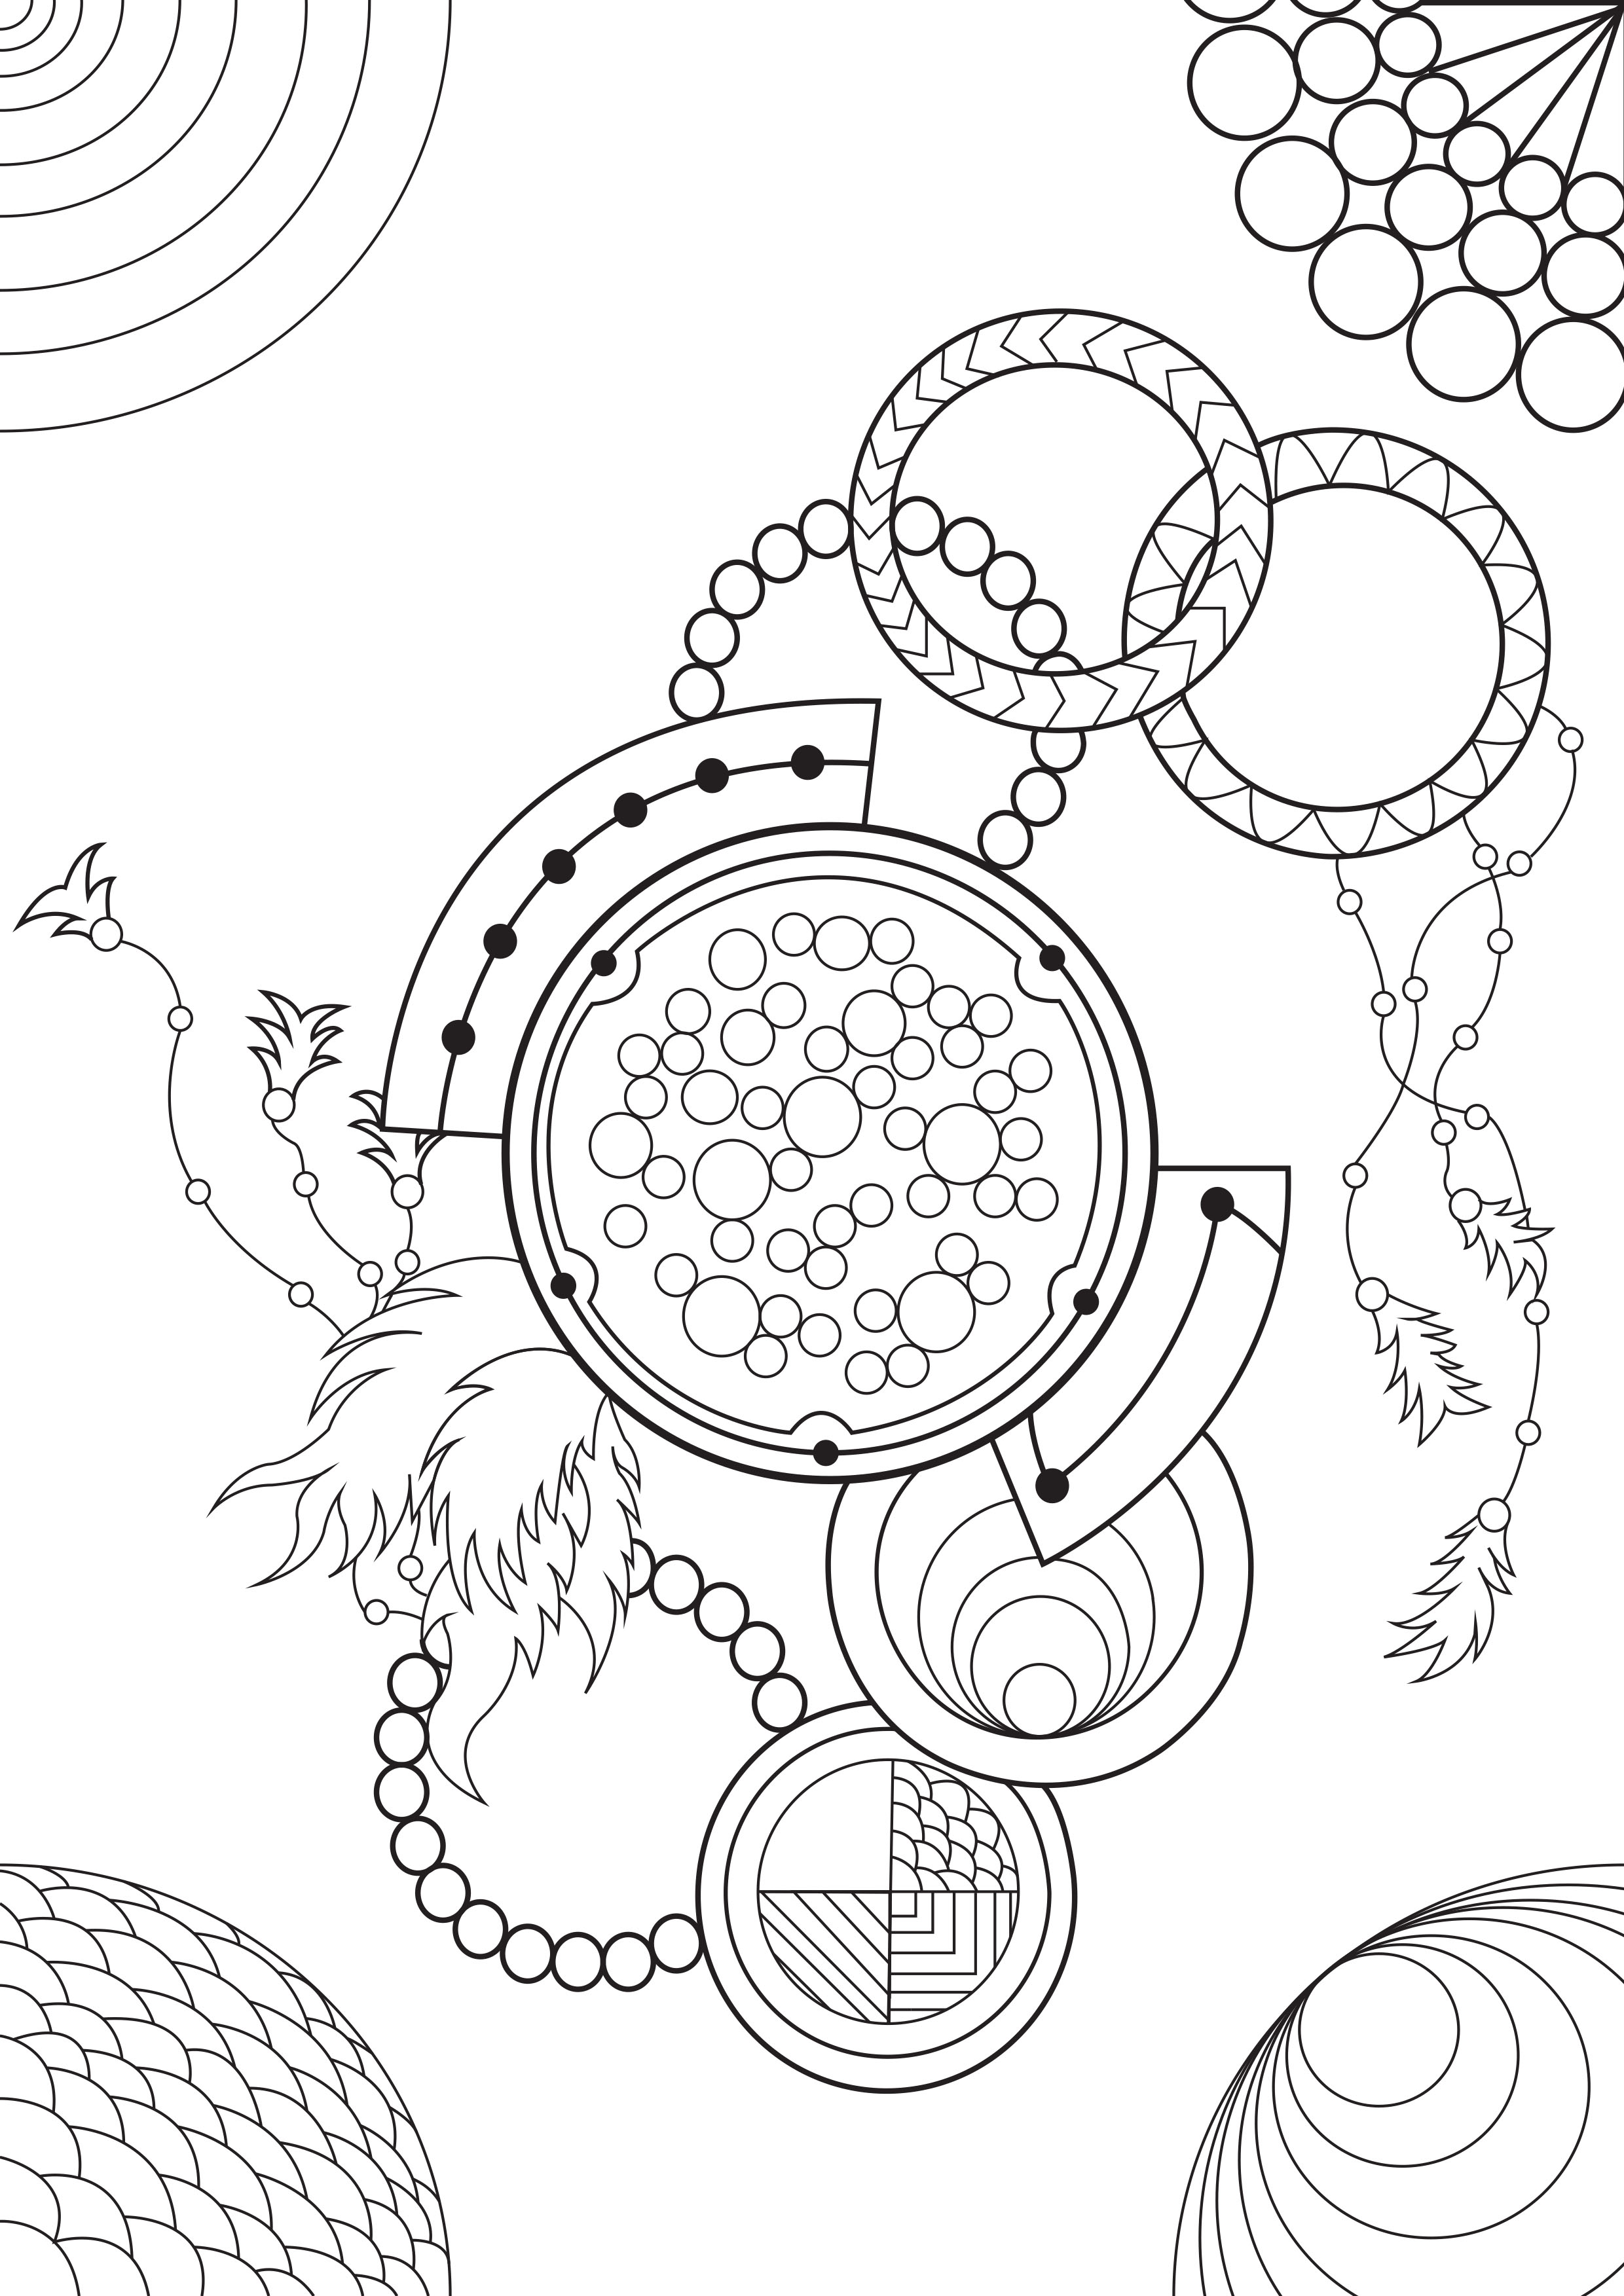 Dreamcatcher Colouring printable art therapy colour therapy download adult colouring native American inspired coloring page